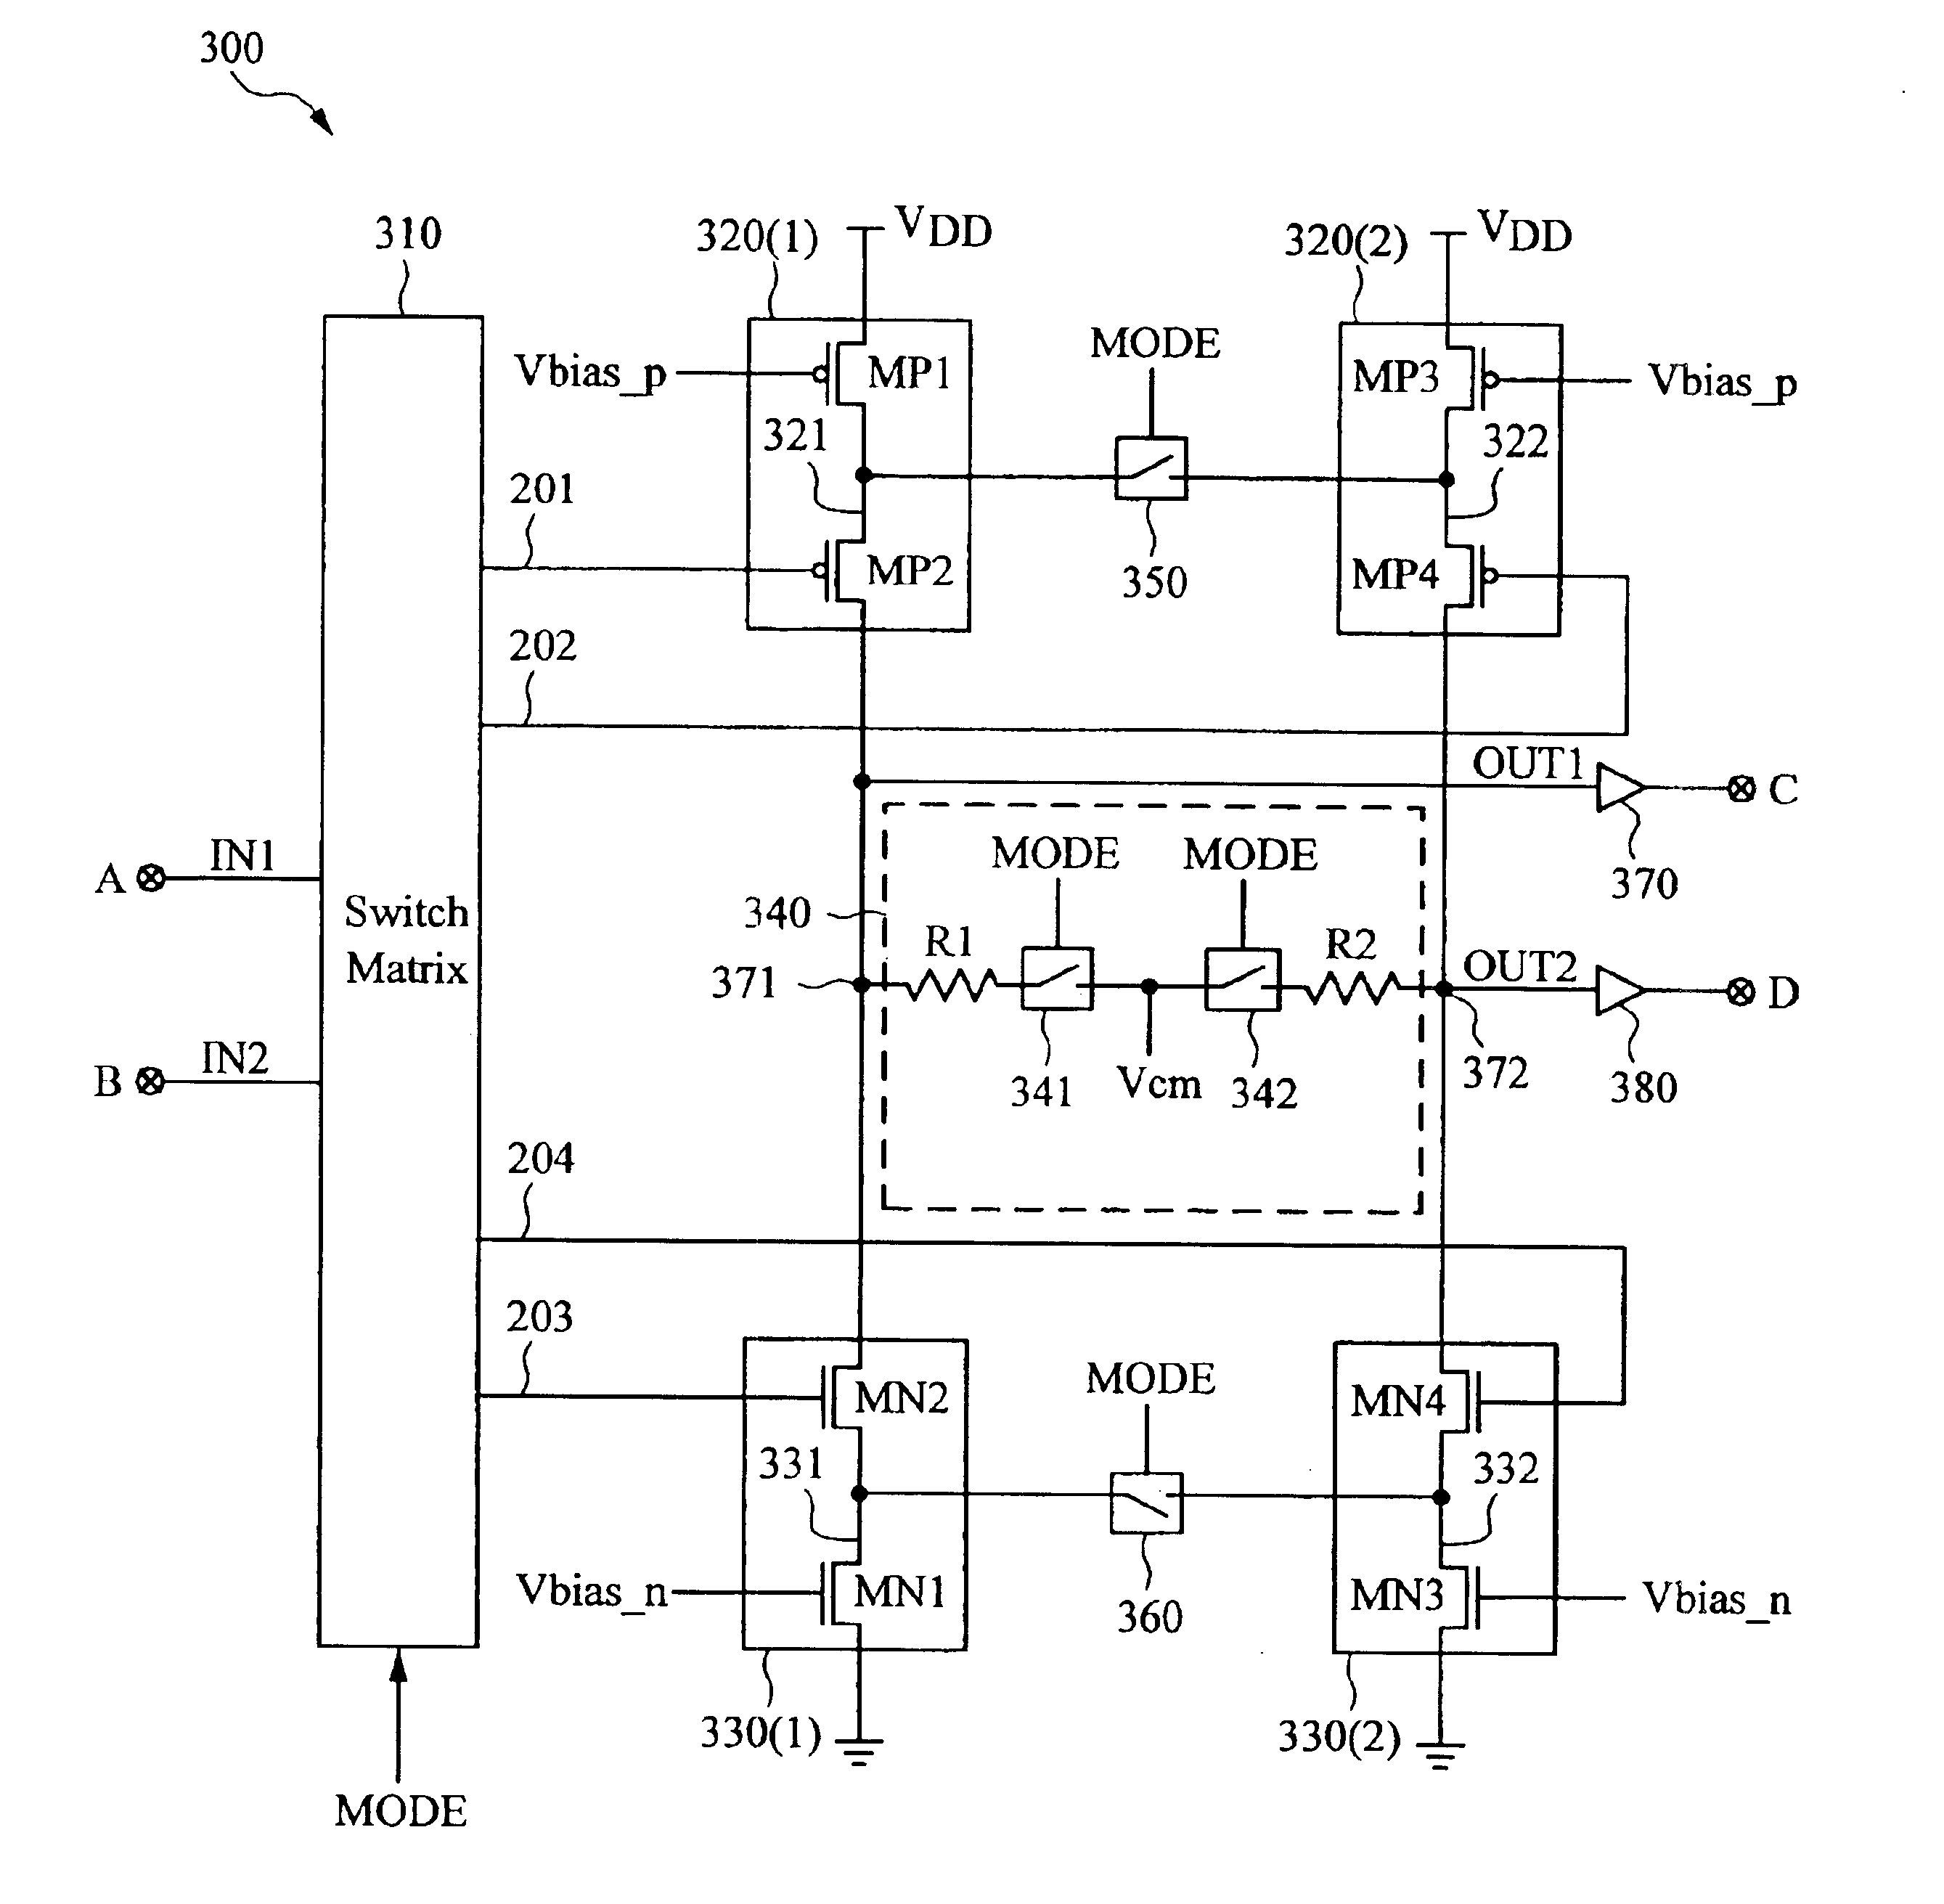 Multi-function input/output driver